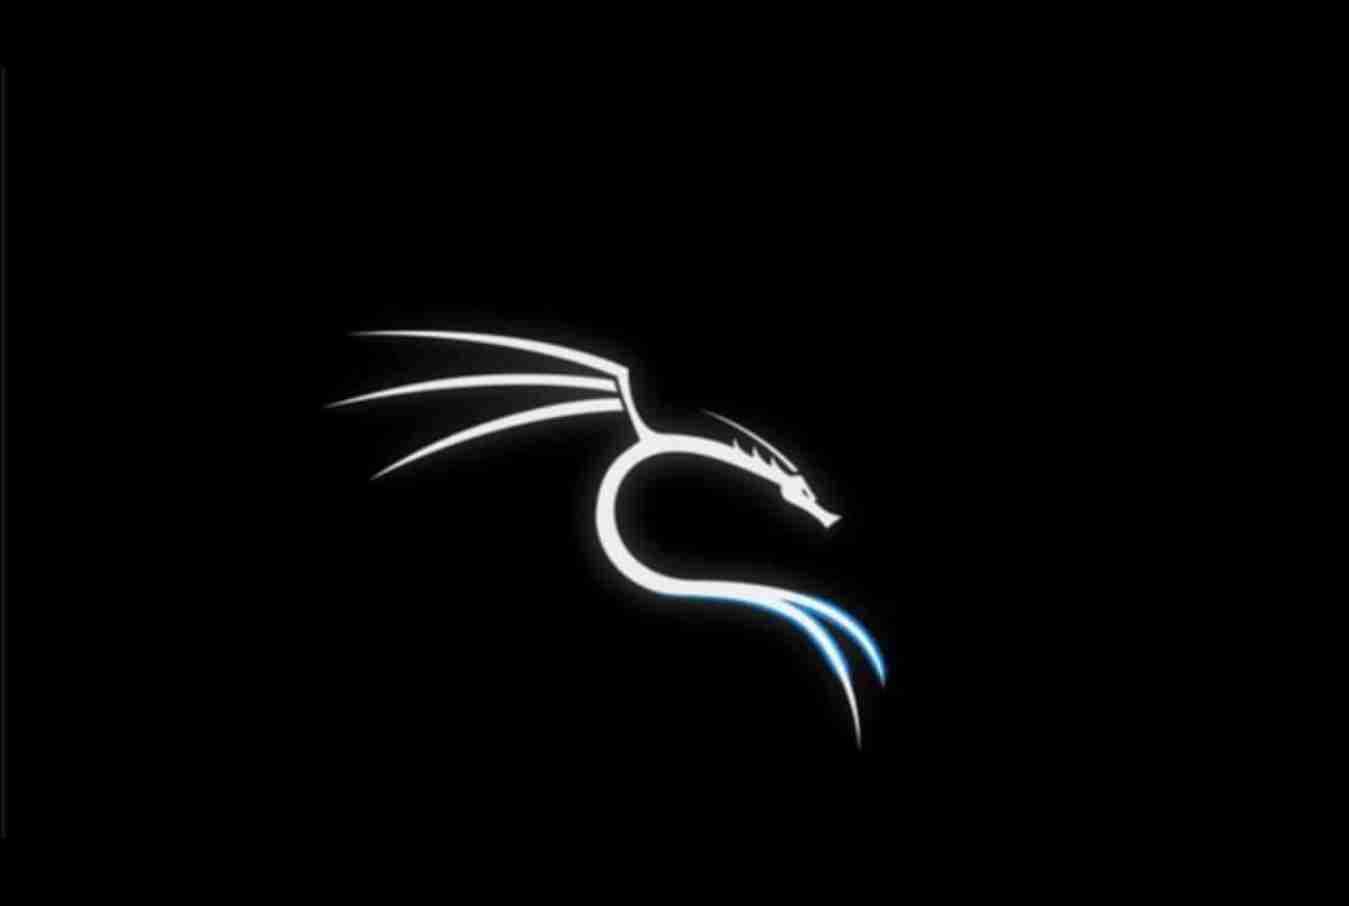 Download Kali Linux 2021.3 - Kali NetHunter on smartwatch, new tools